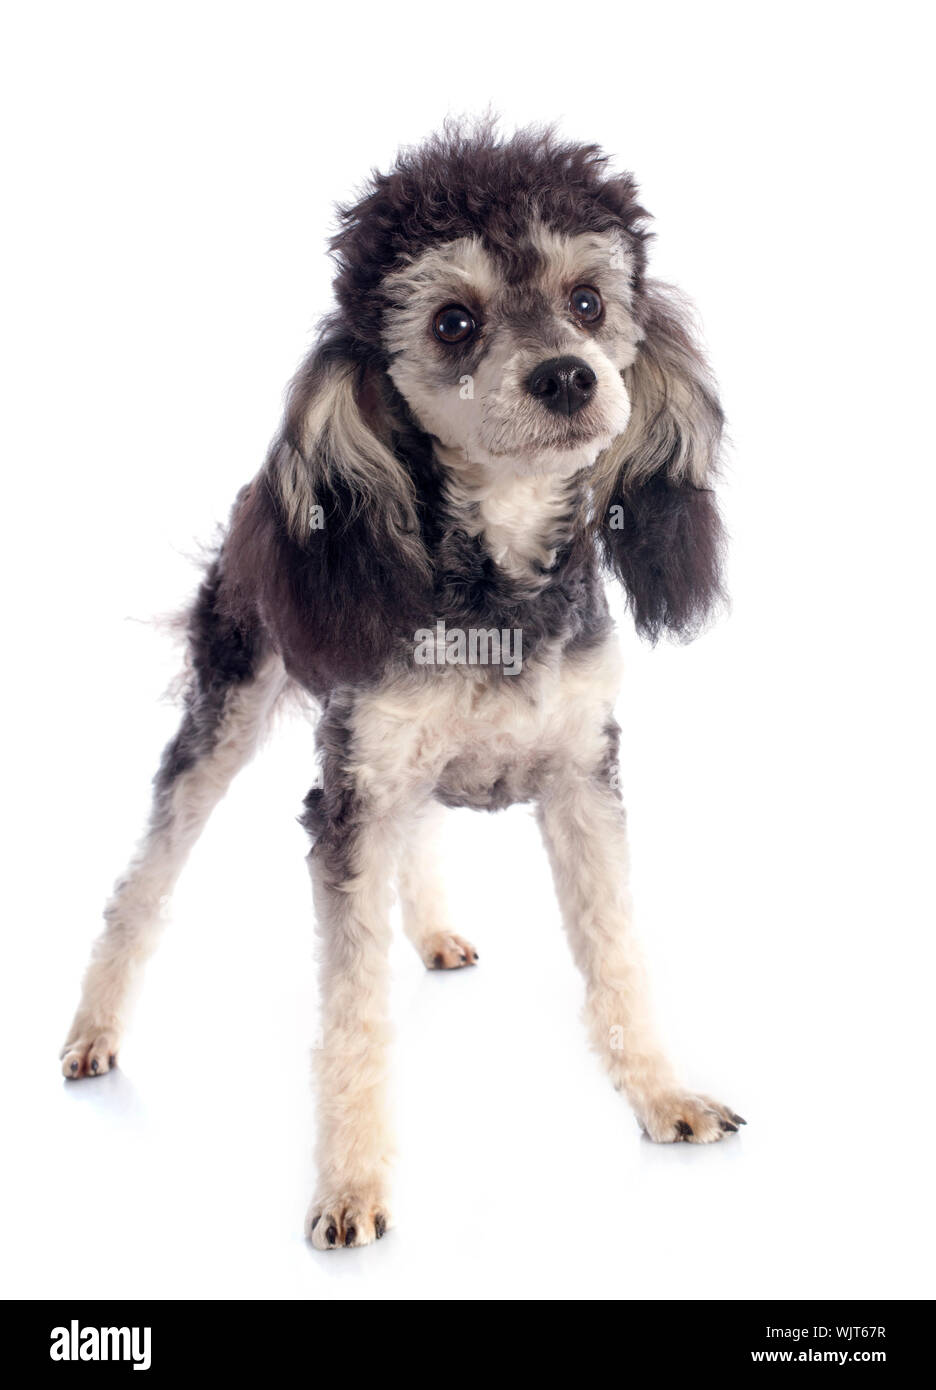 bicolor poodle in front of a white background Stock Photo